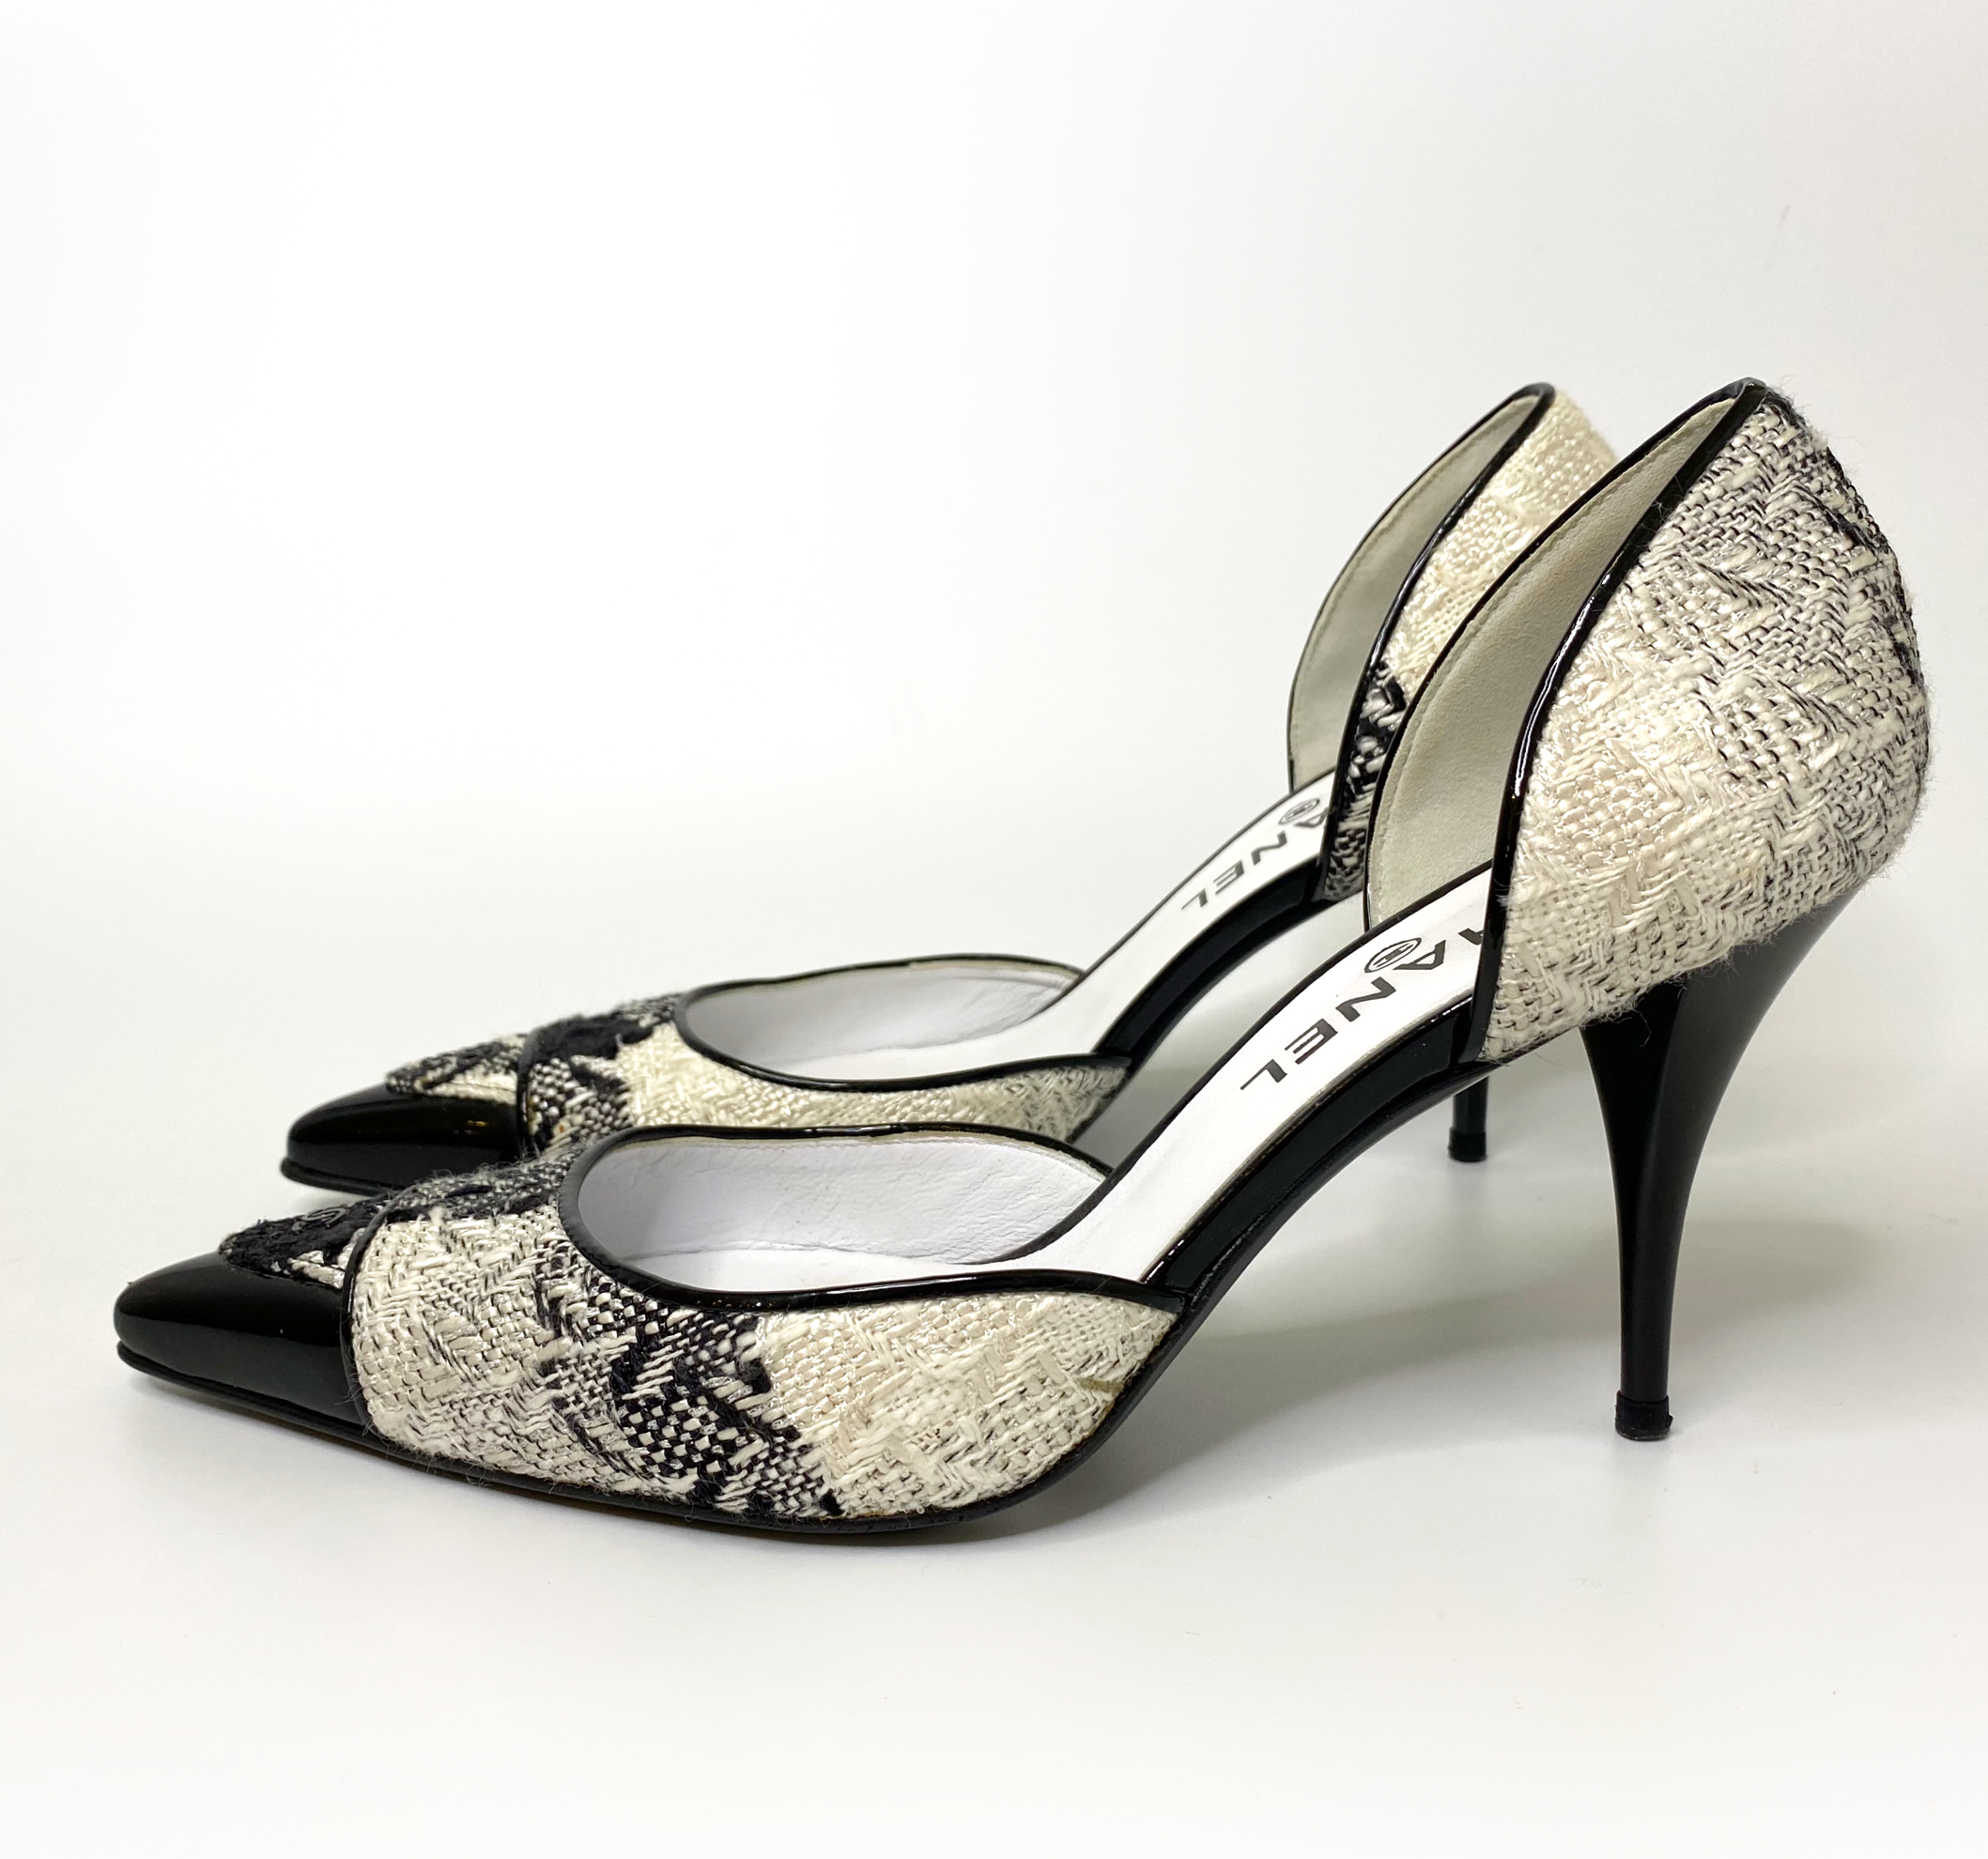 Chanel Black and White Tweed D’Orsay Pumps